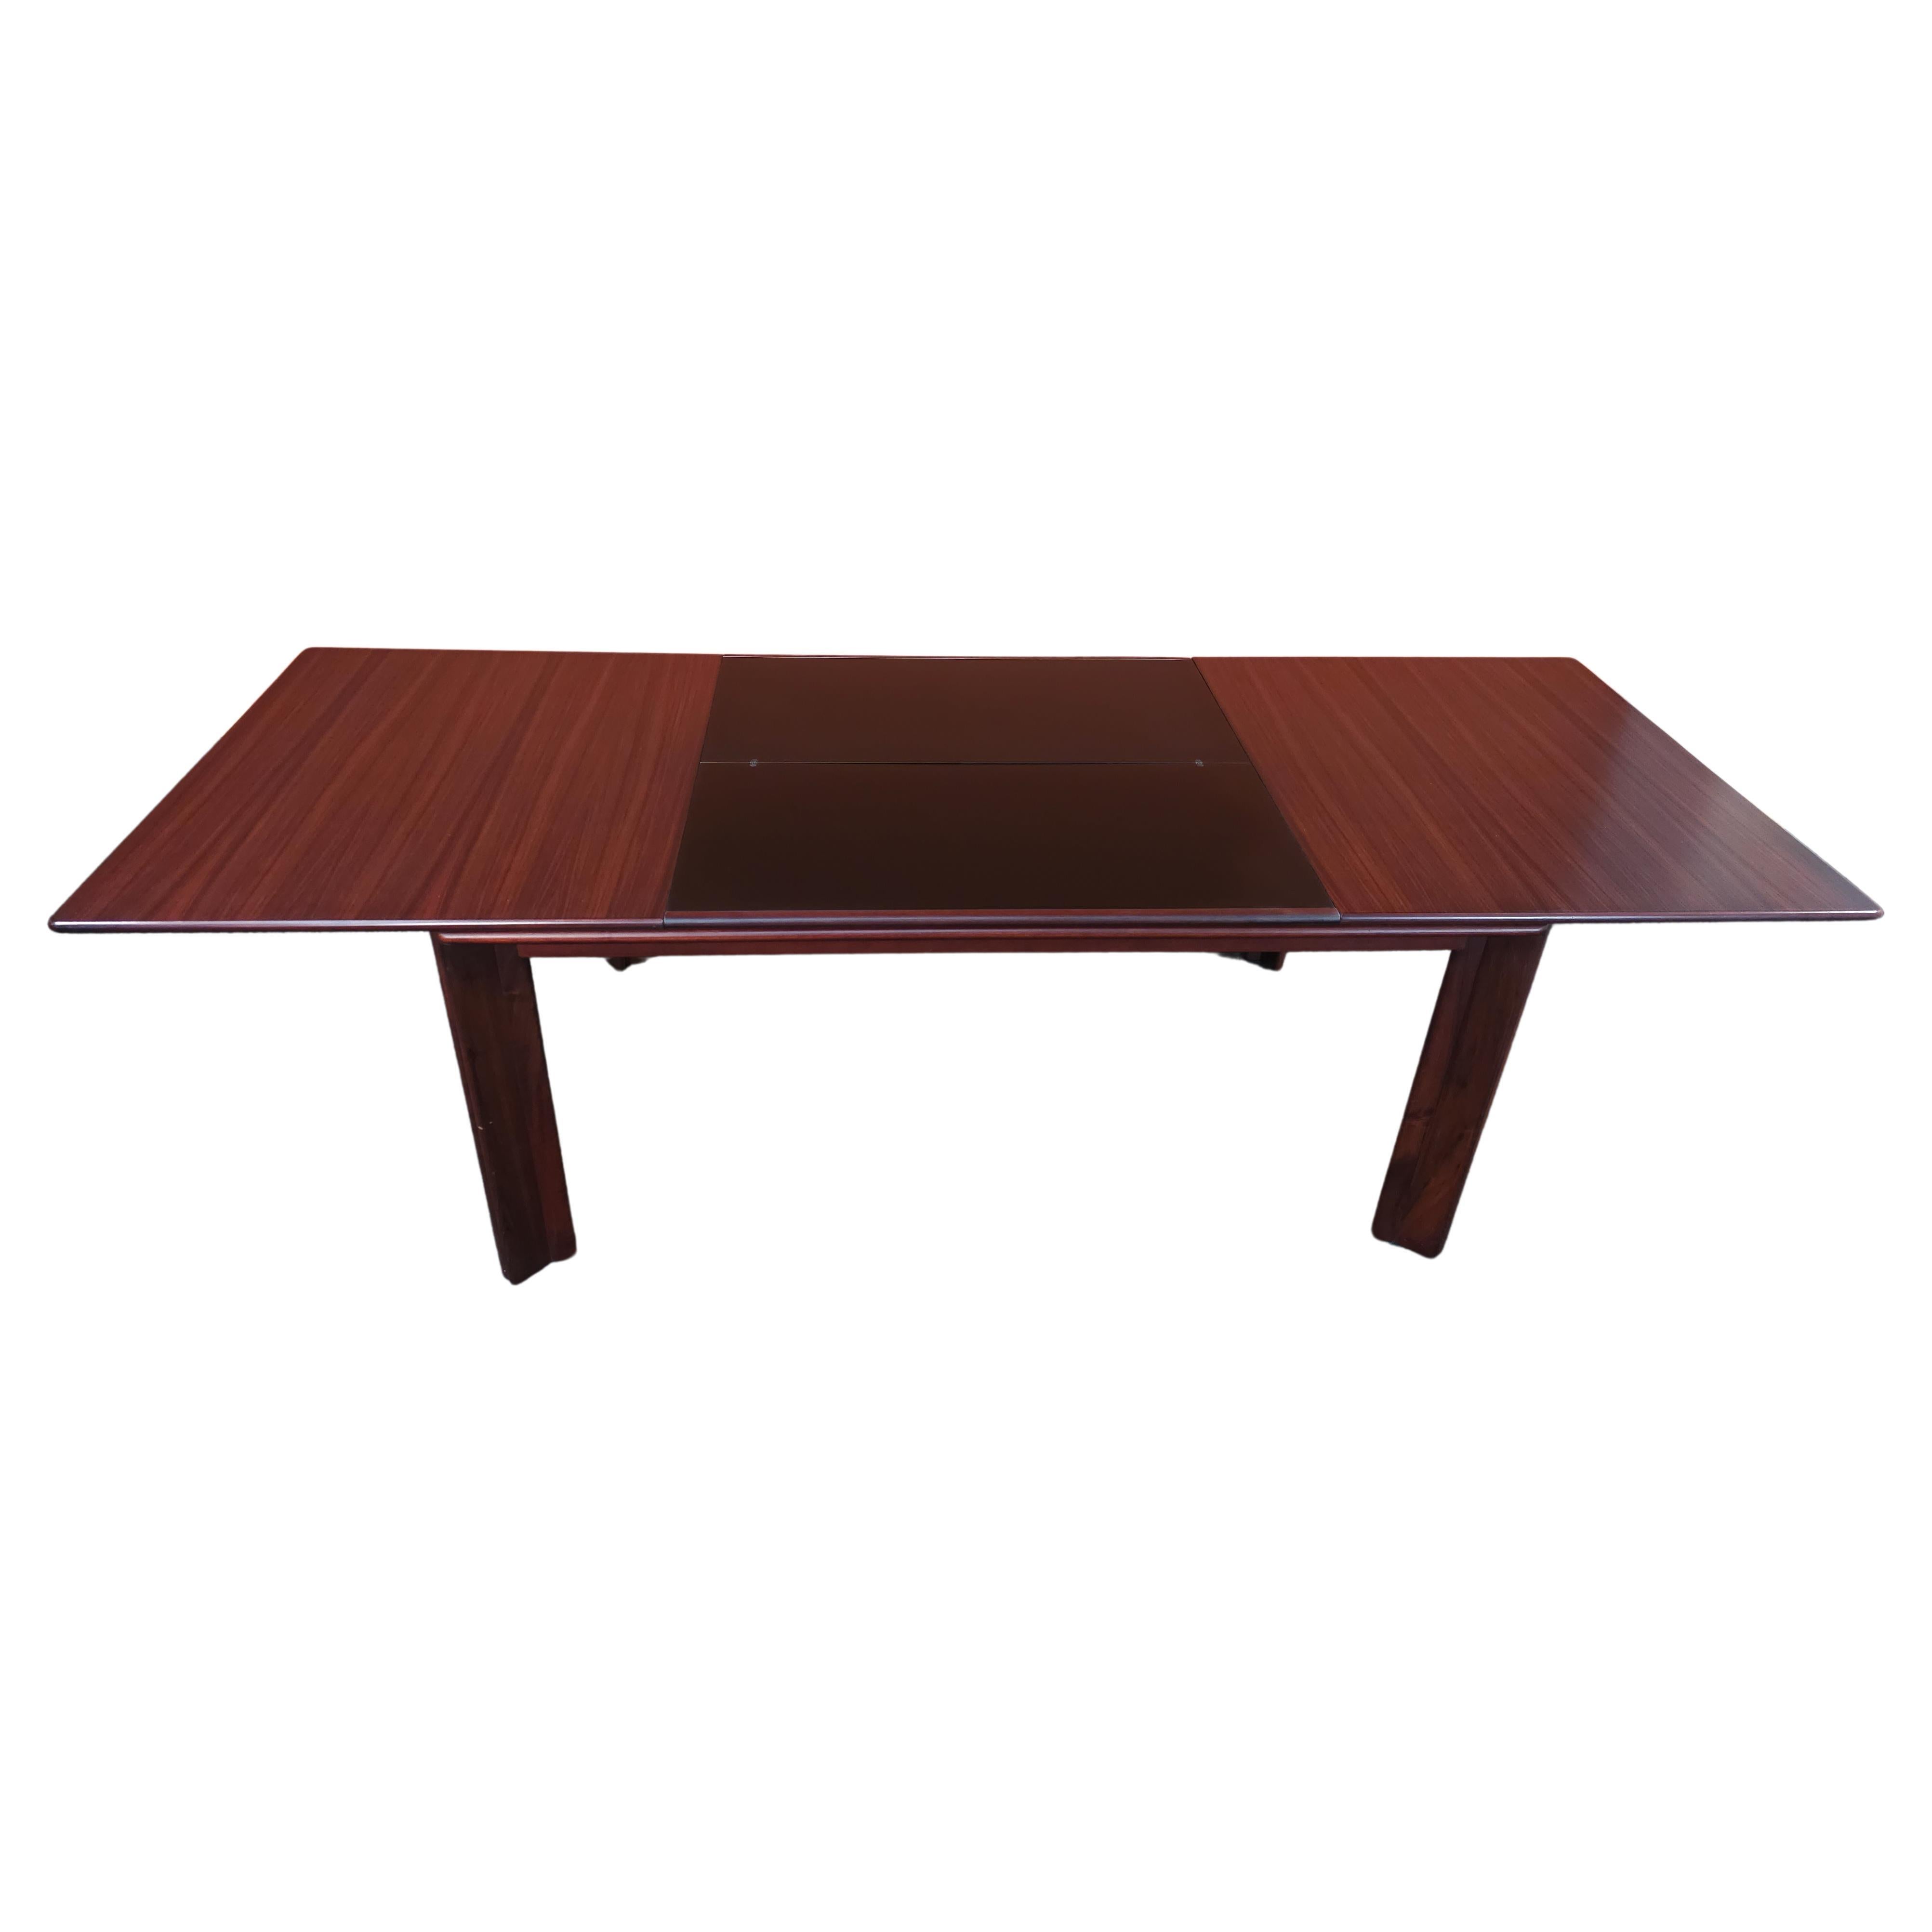 Italian Midcentury "Mou" Dining Table by Afra and Tobia Scarpa, 1970 For Sale